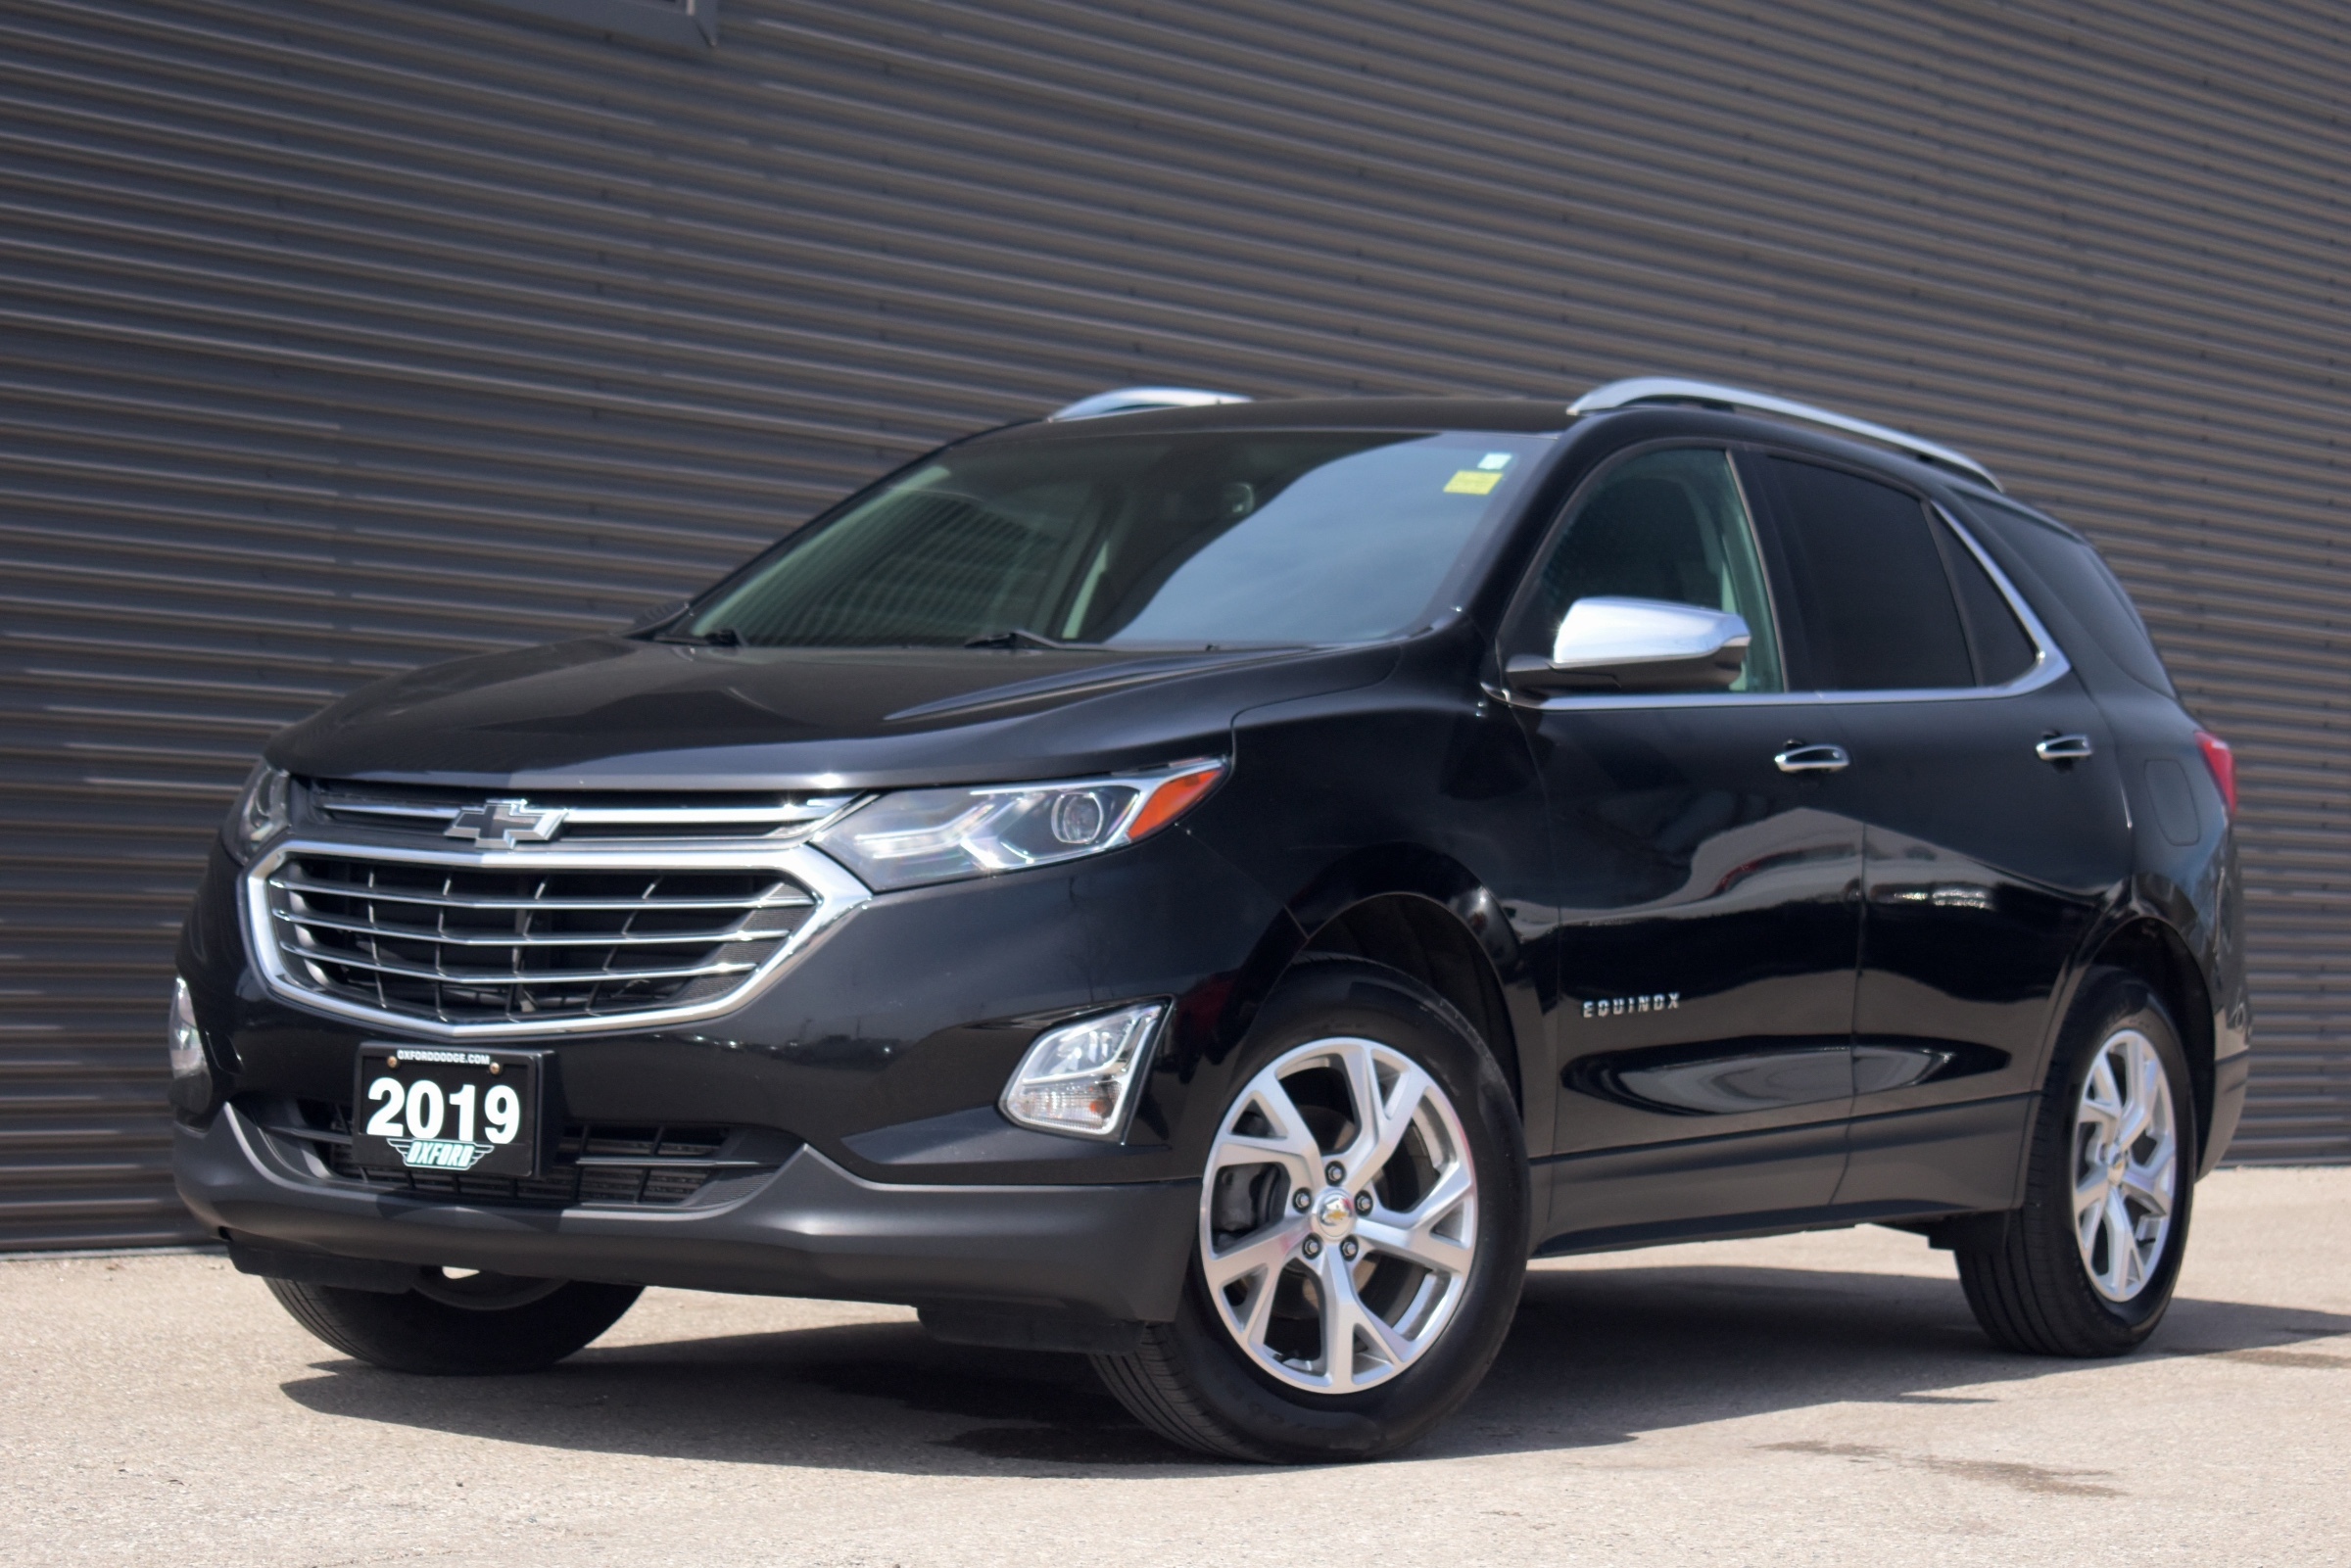 2019 Chevrolet Equinox Premier One Owner, Smooth Ride, Clean